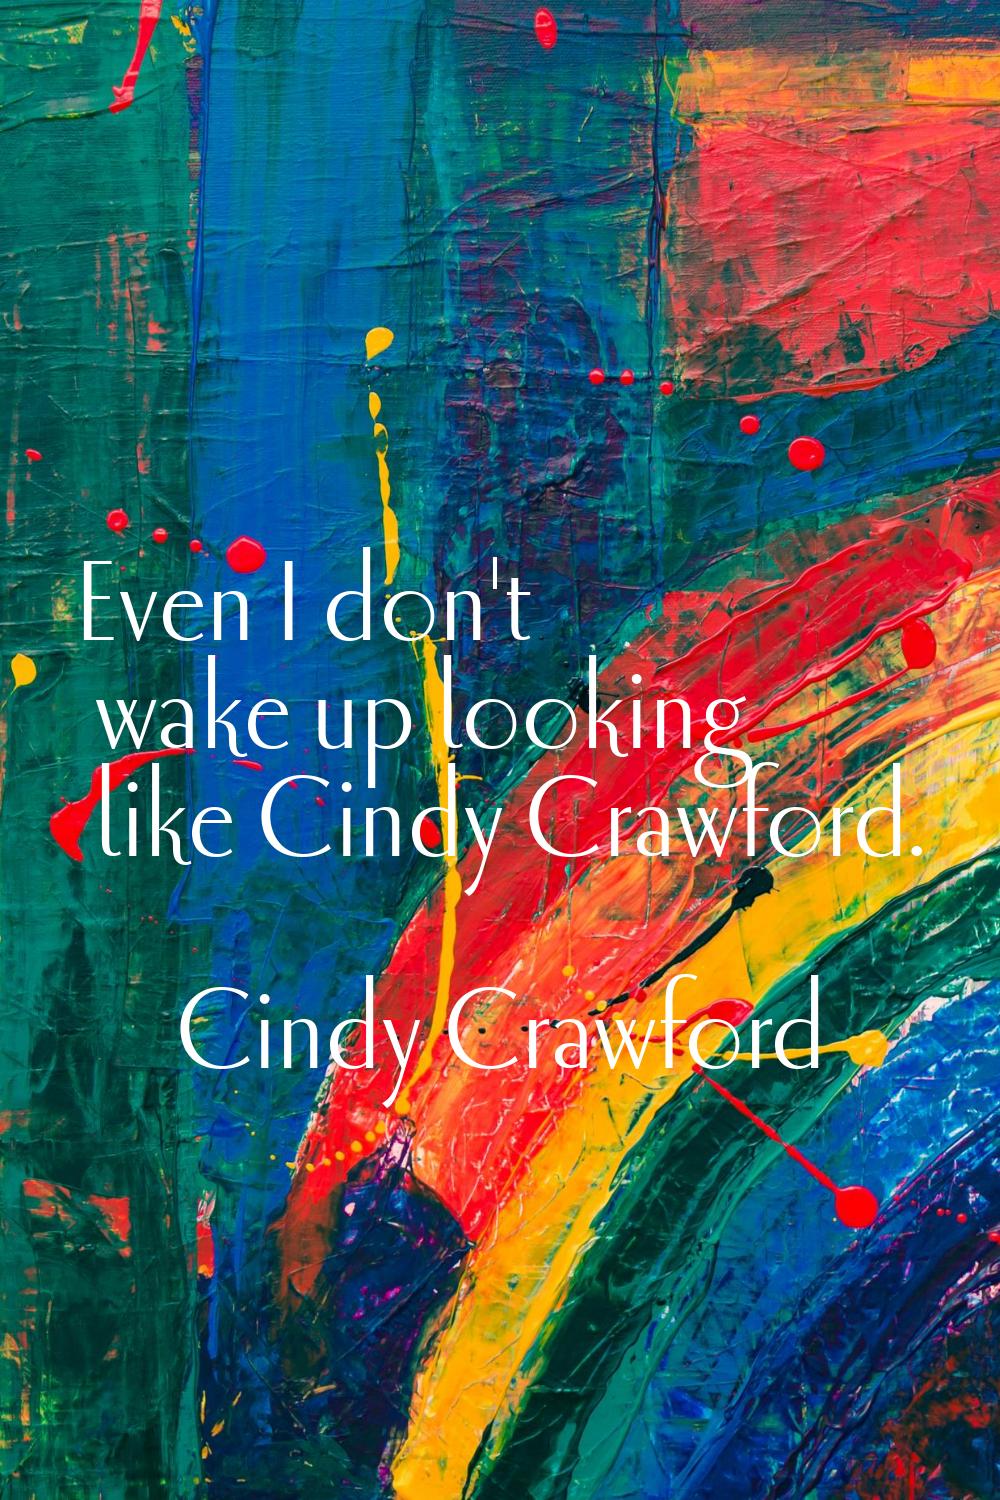 Even I don't wake up looking like Cindy Crawford.